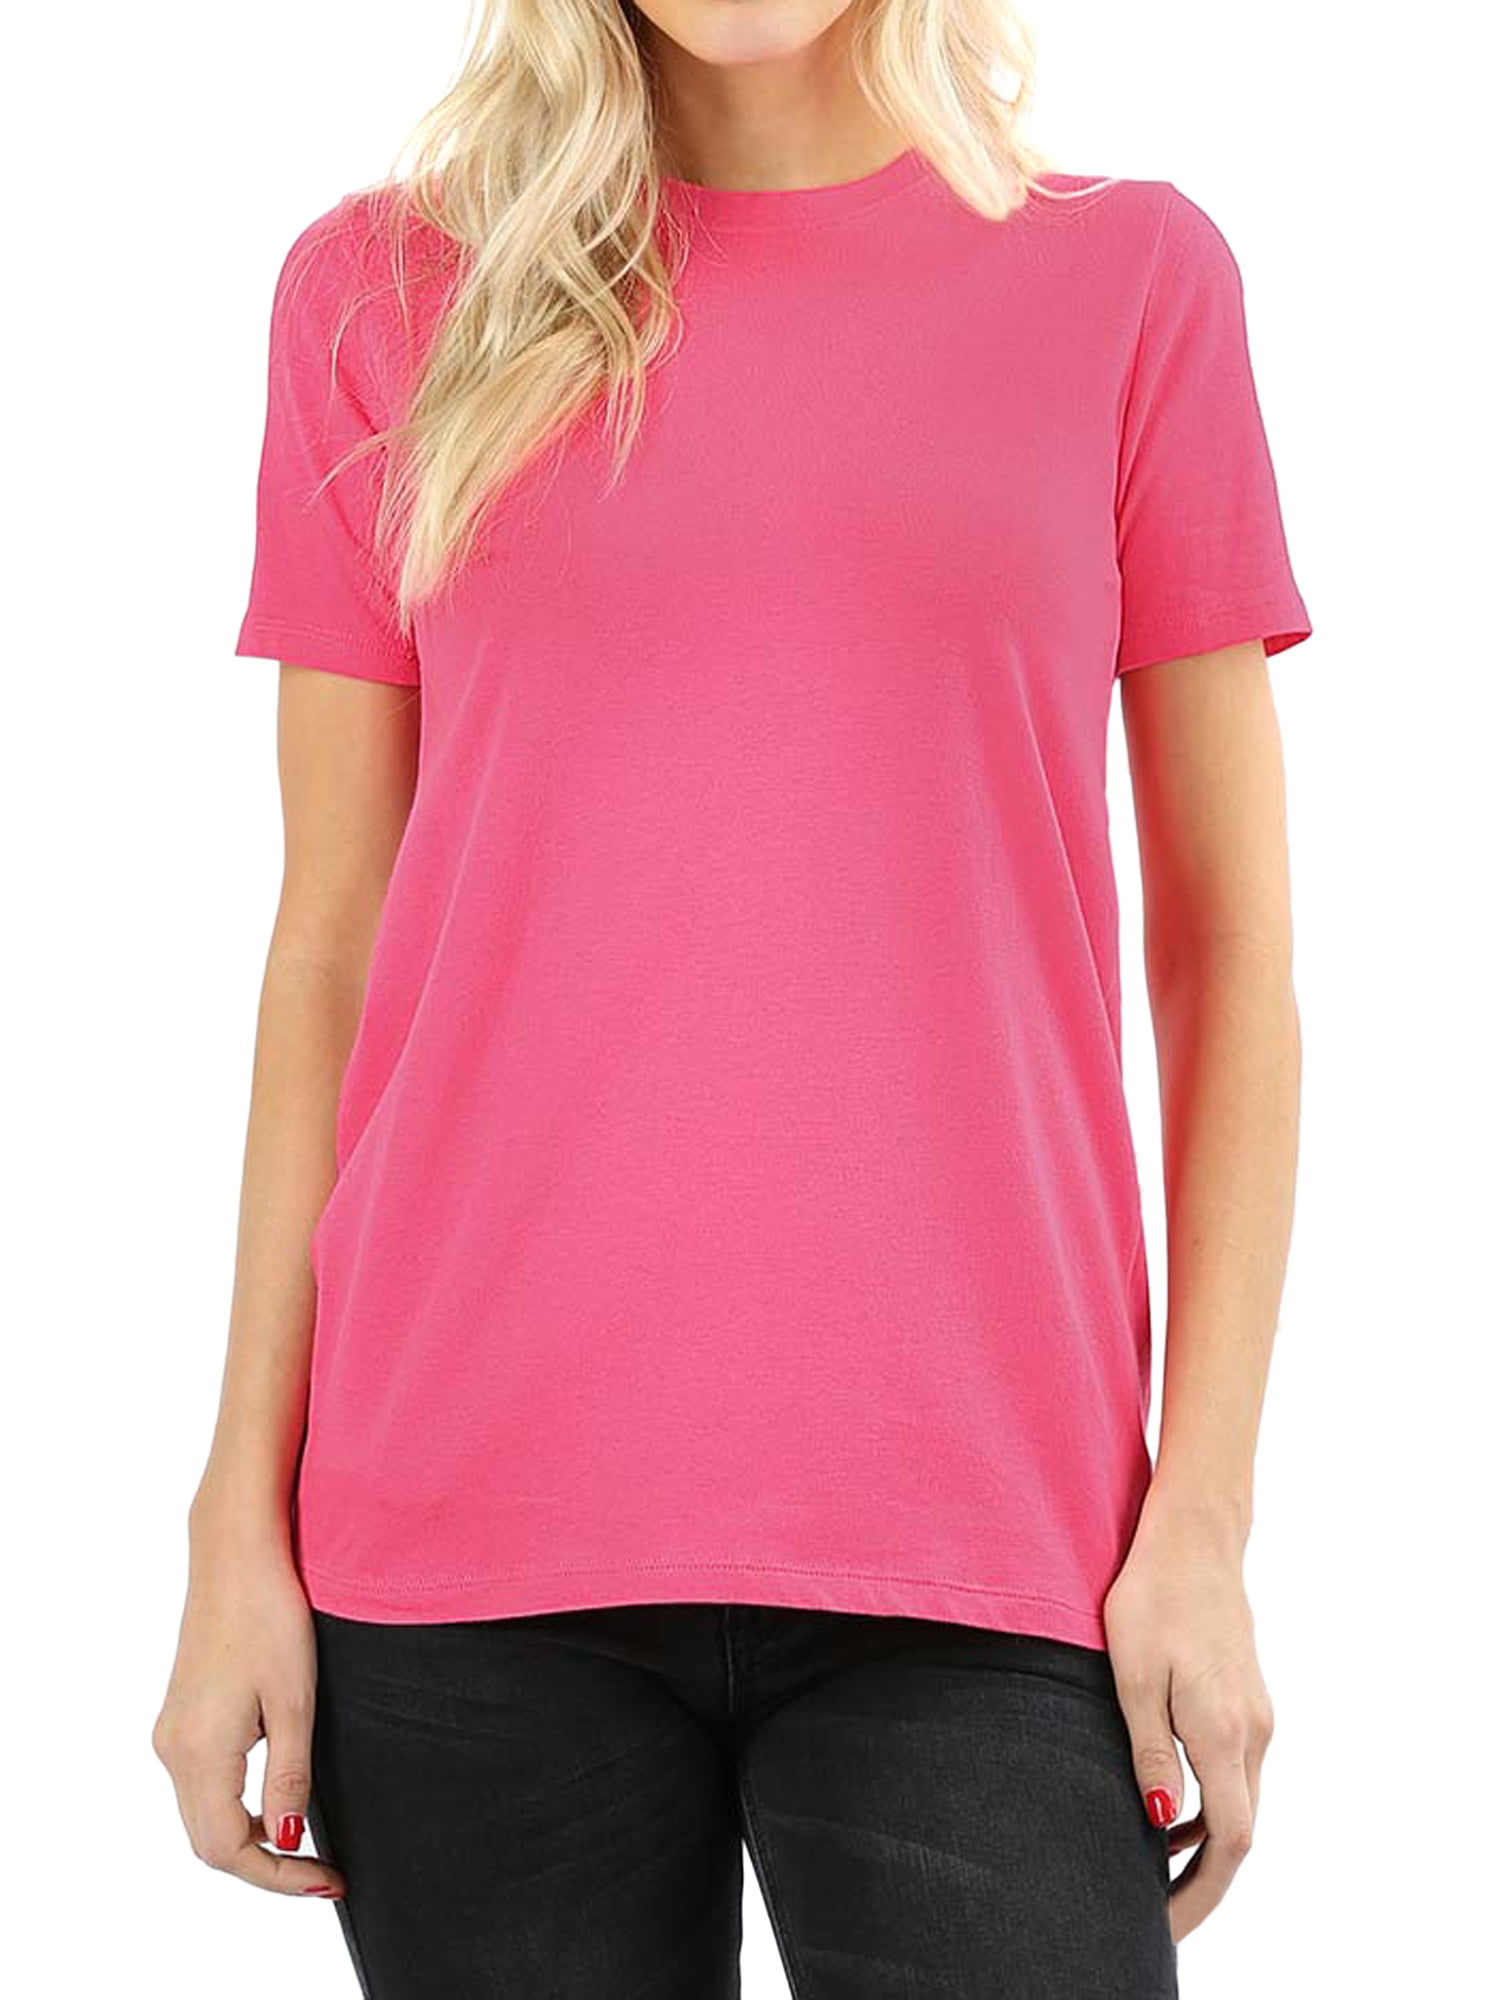 TheLovely - Women's Cotton Crew Neck Short Sleeve Relaxed Fit Basic Tee ...